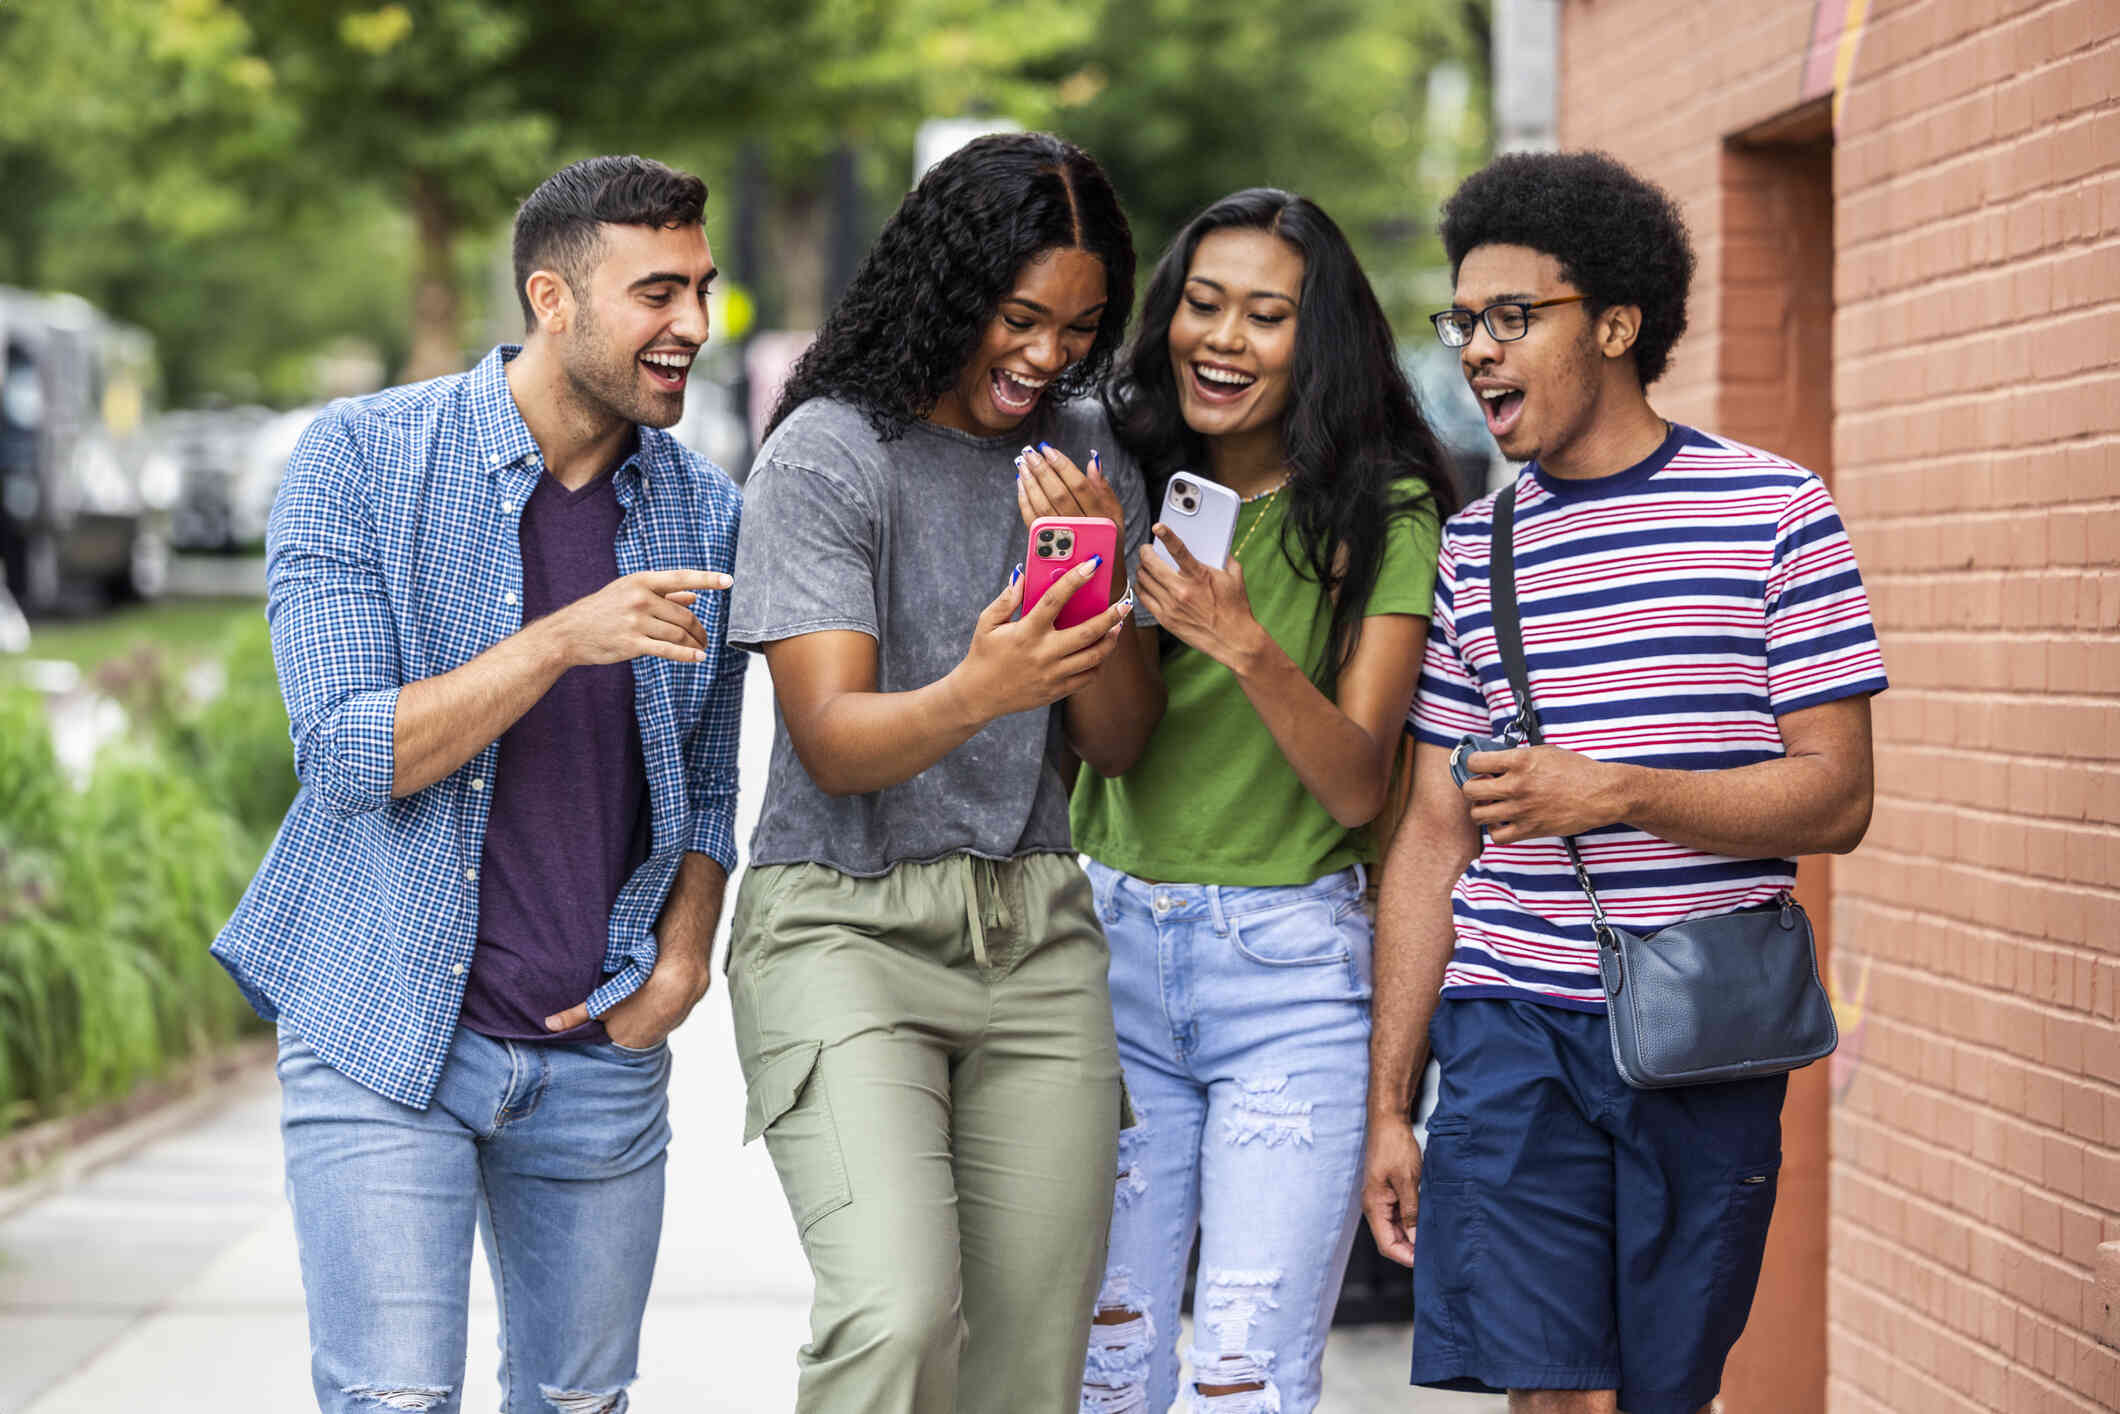 A group of adults stand together outside and look at a cellphone while smiling and laughing.